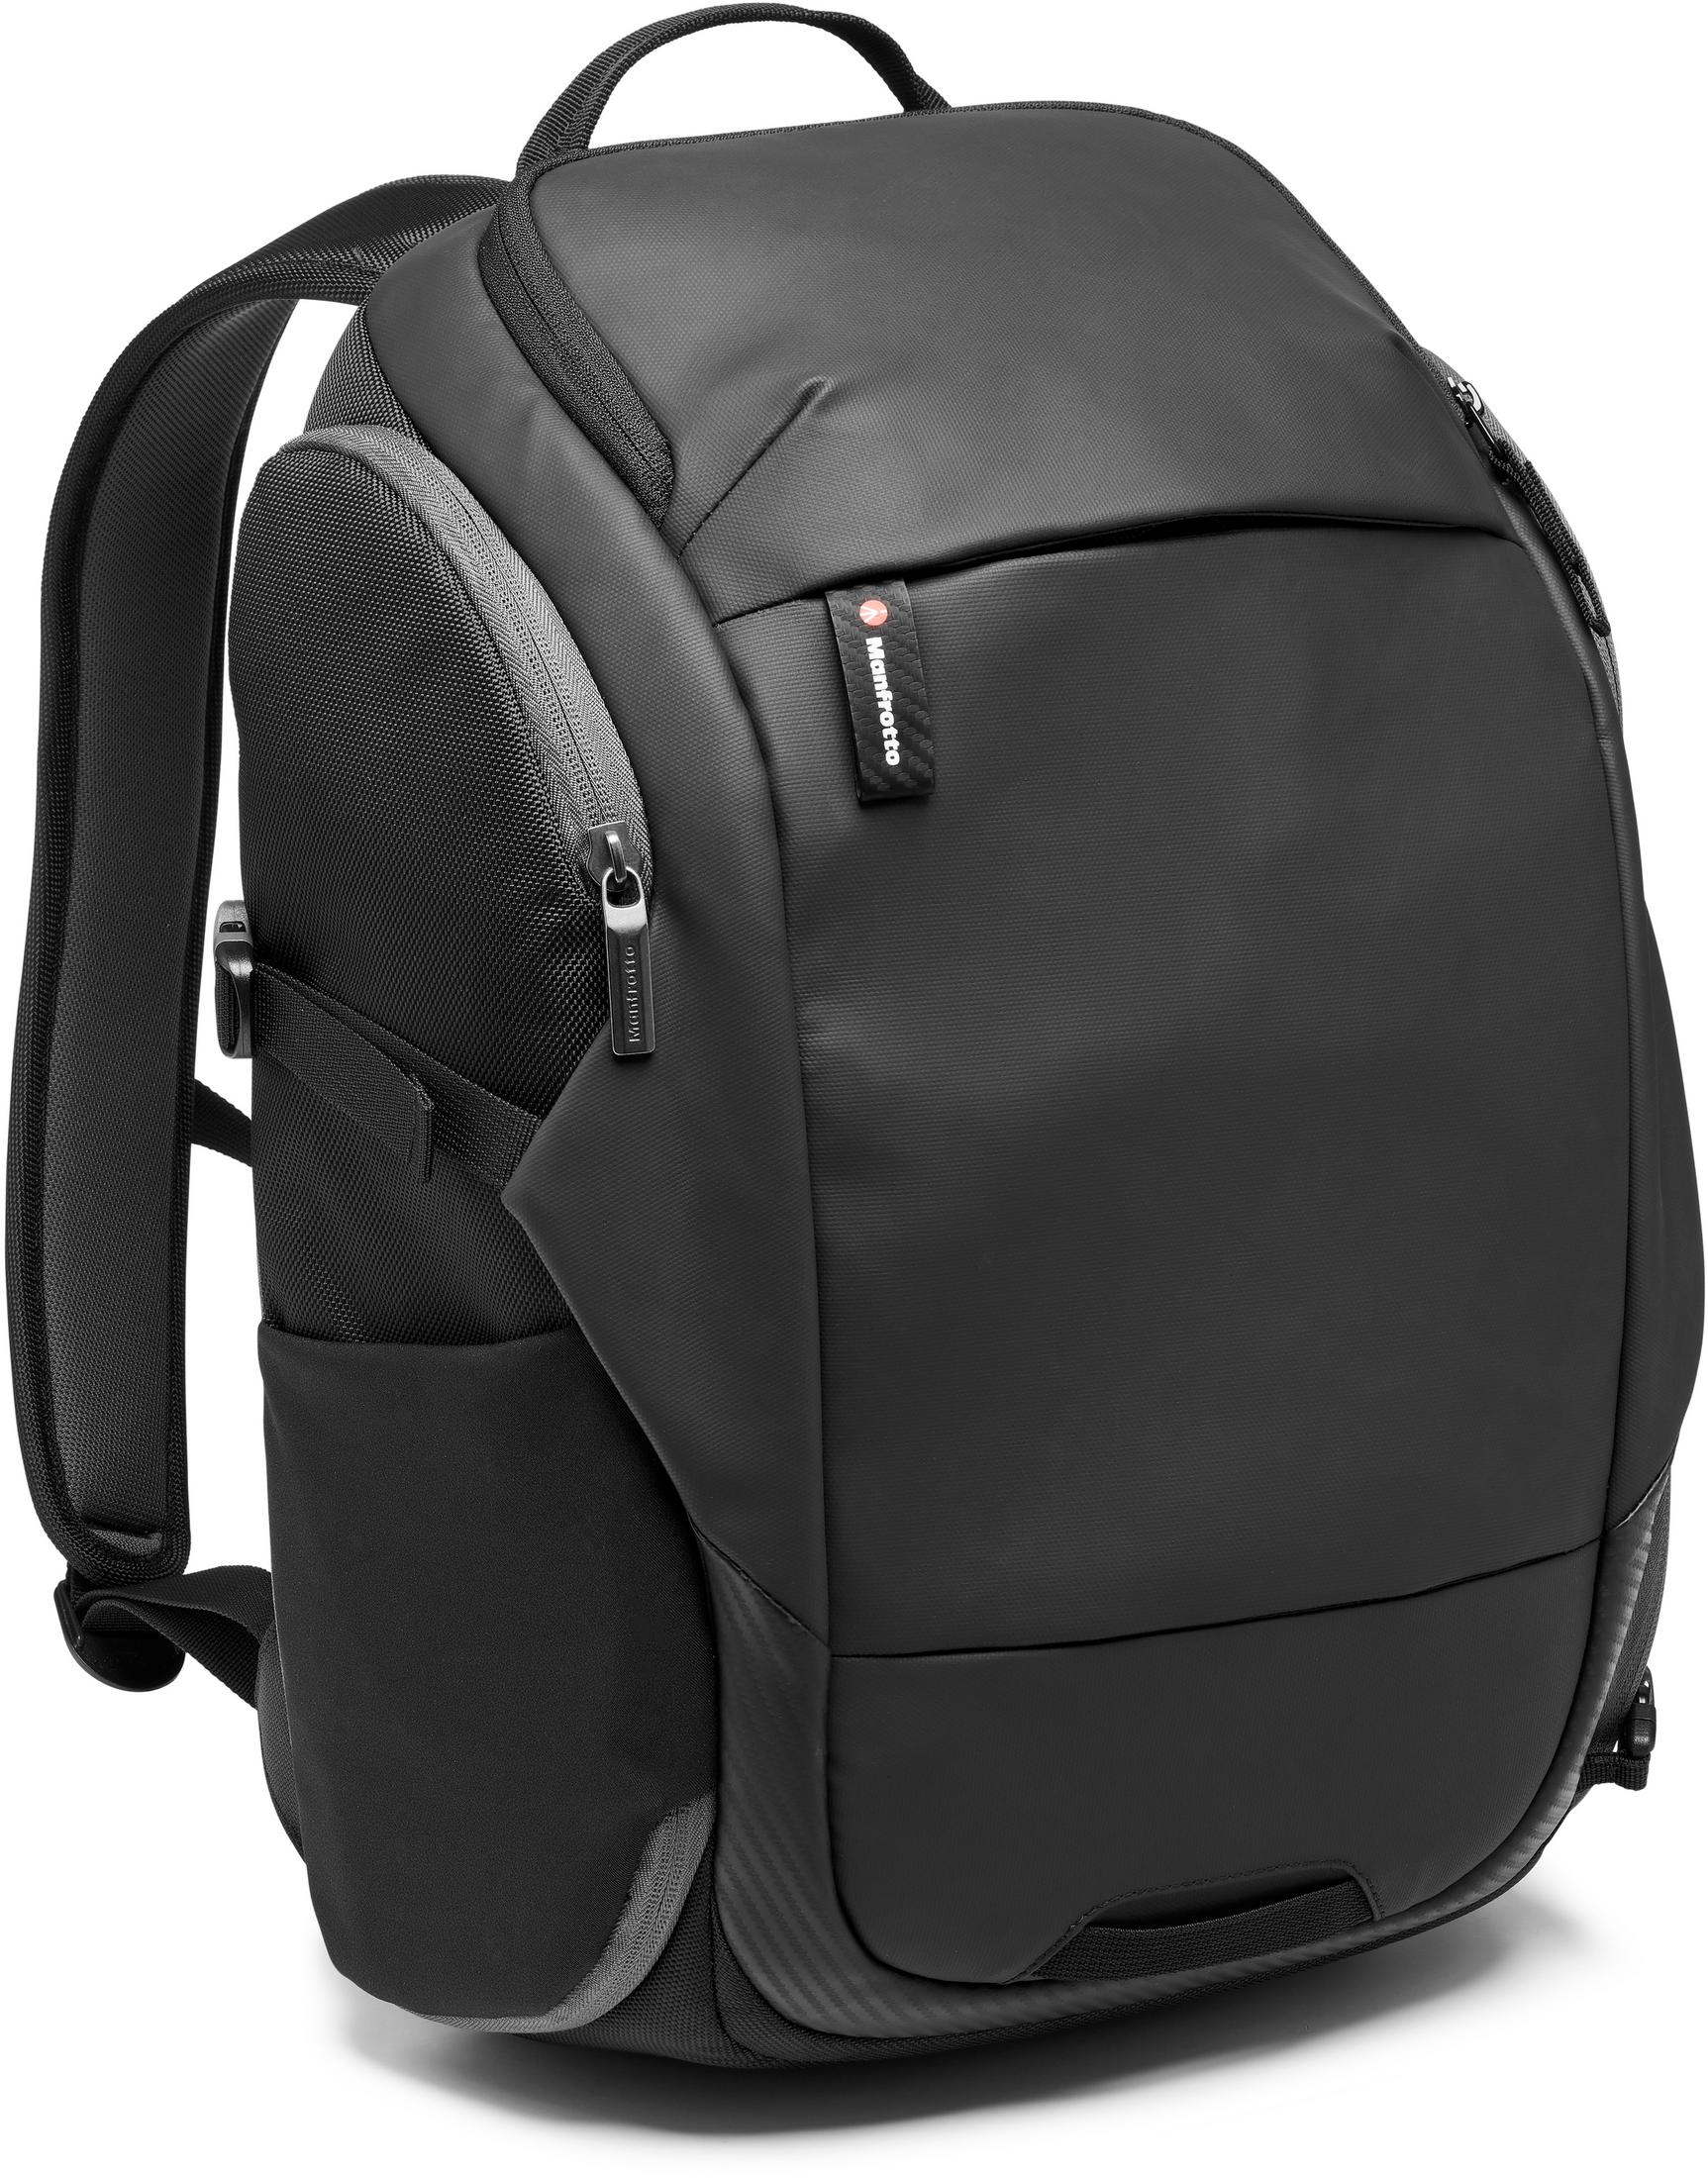 MA2-BP-T BACKPACK TRAVEL Schwarz ADVANCED2 M MB MANFROTTO Kameratasche,